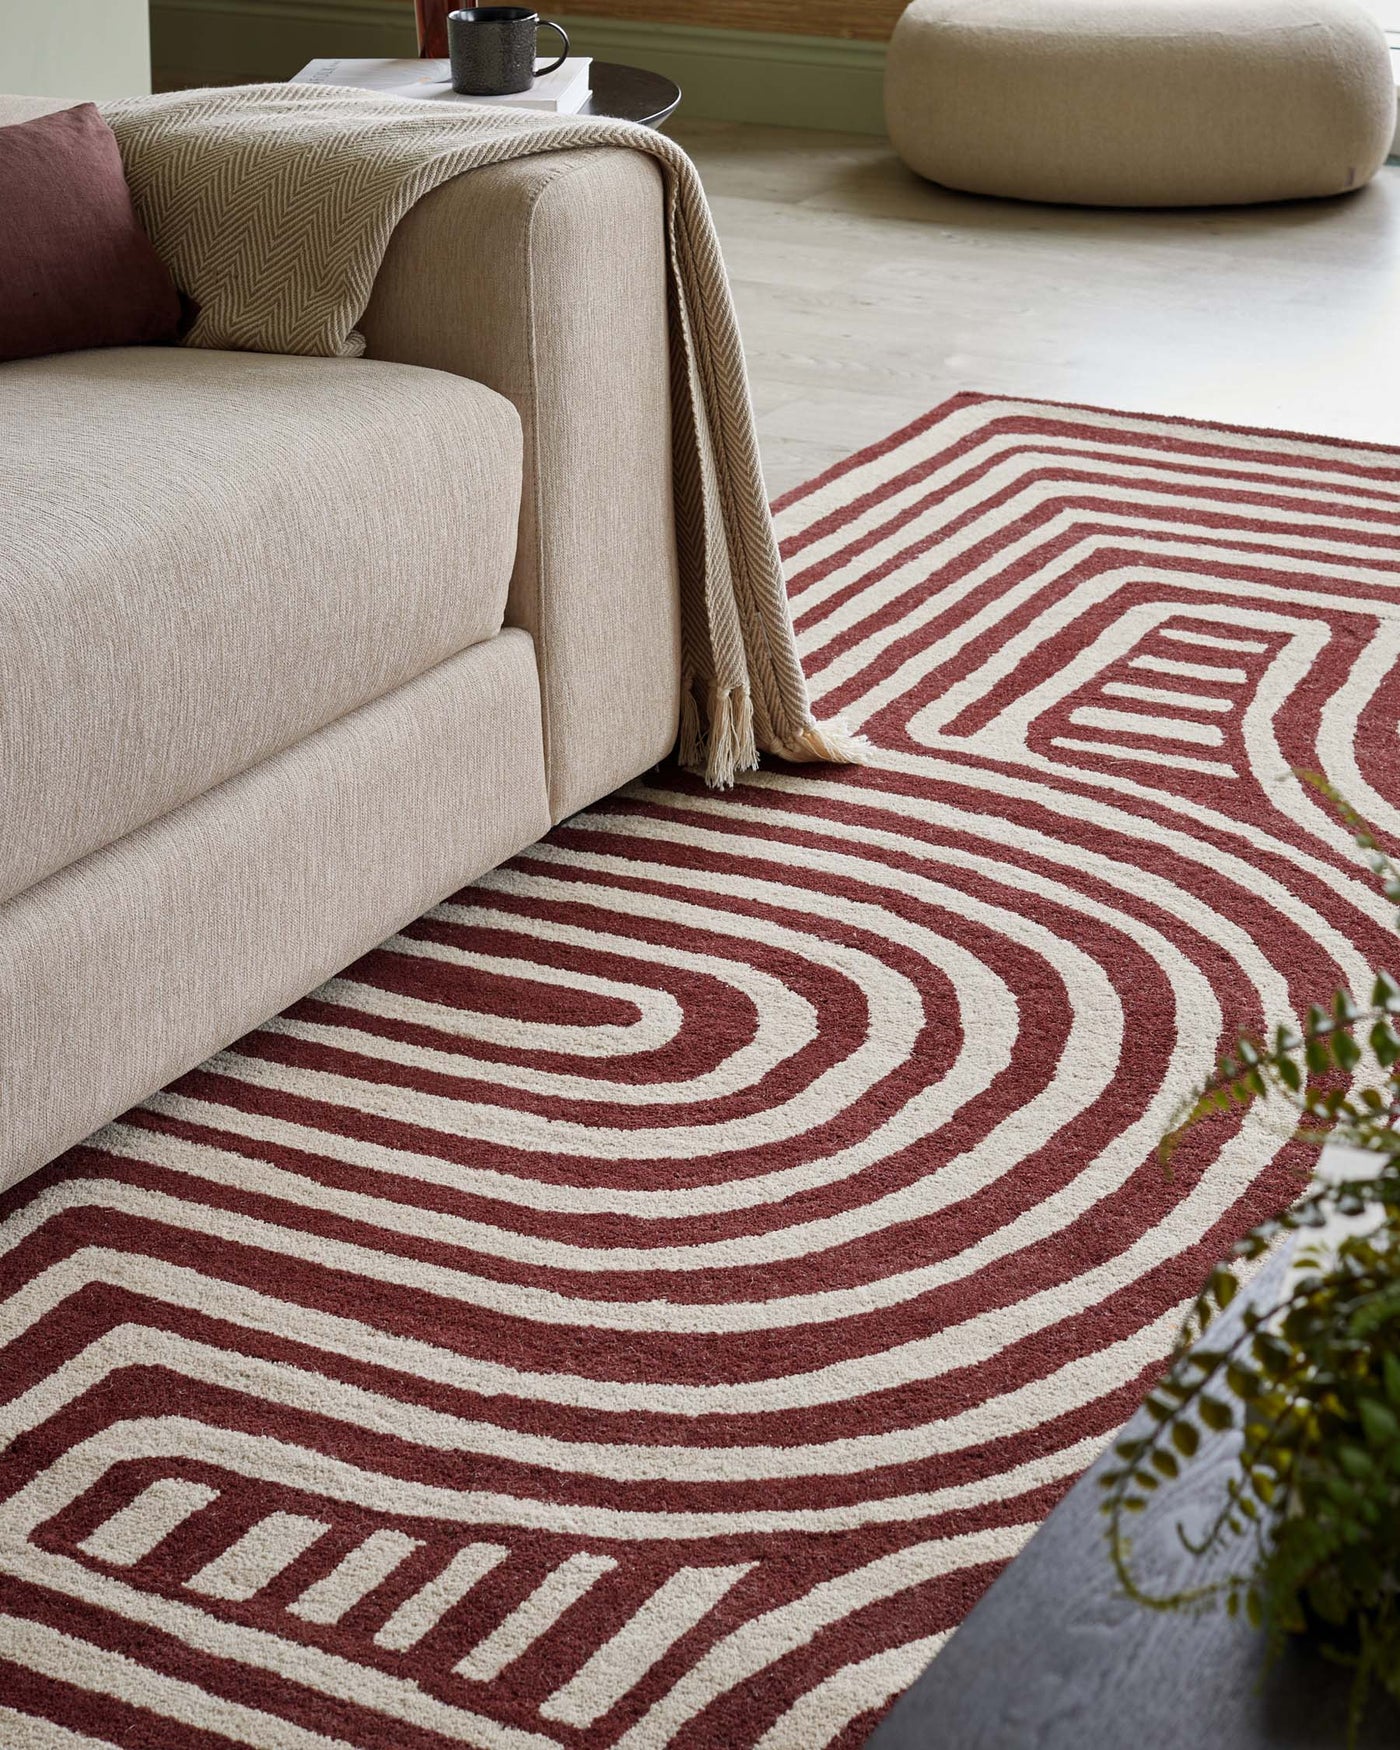 A contemporary taupe sofa with a textured throw blanket is paired with a round side table. In the background, a modern, rounded beige ottoman complements the scene. The geometric patterned area rug beneath features concentric circles in shades of red and cream, creating a bold visual anchor for the space.